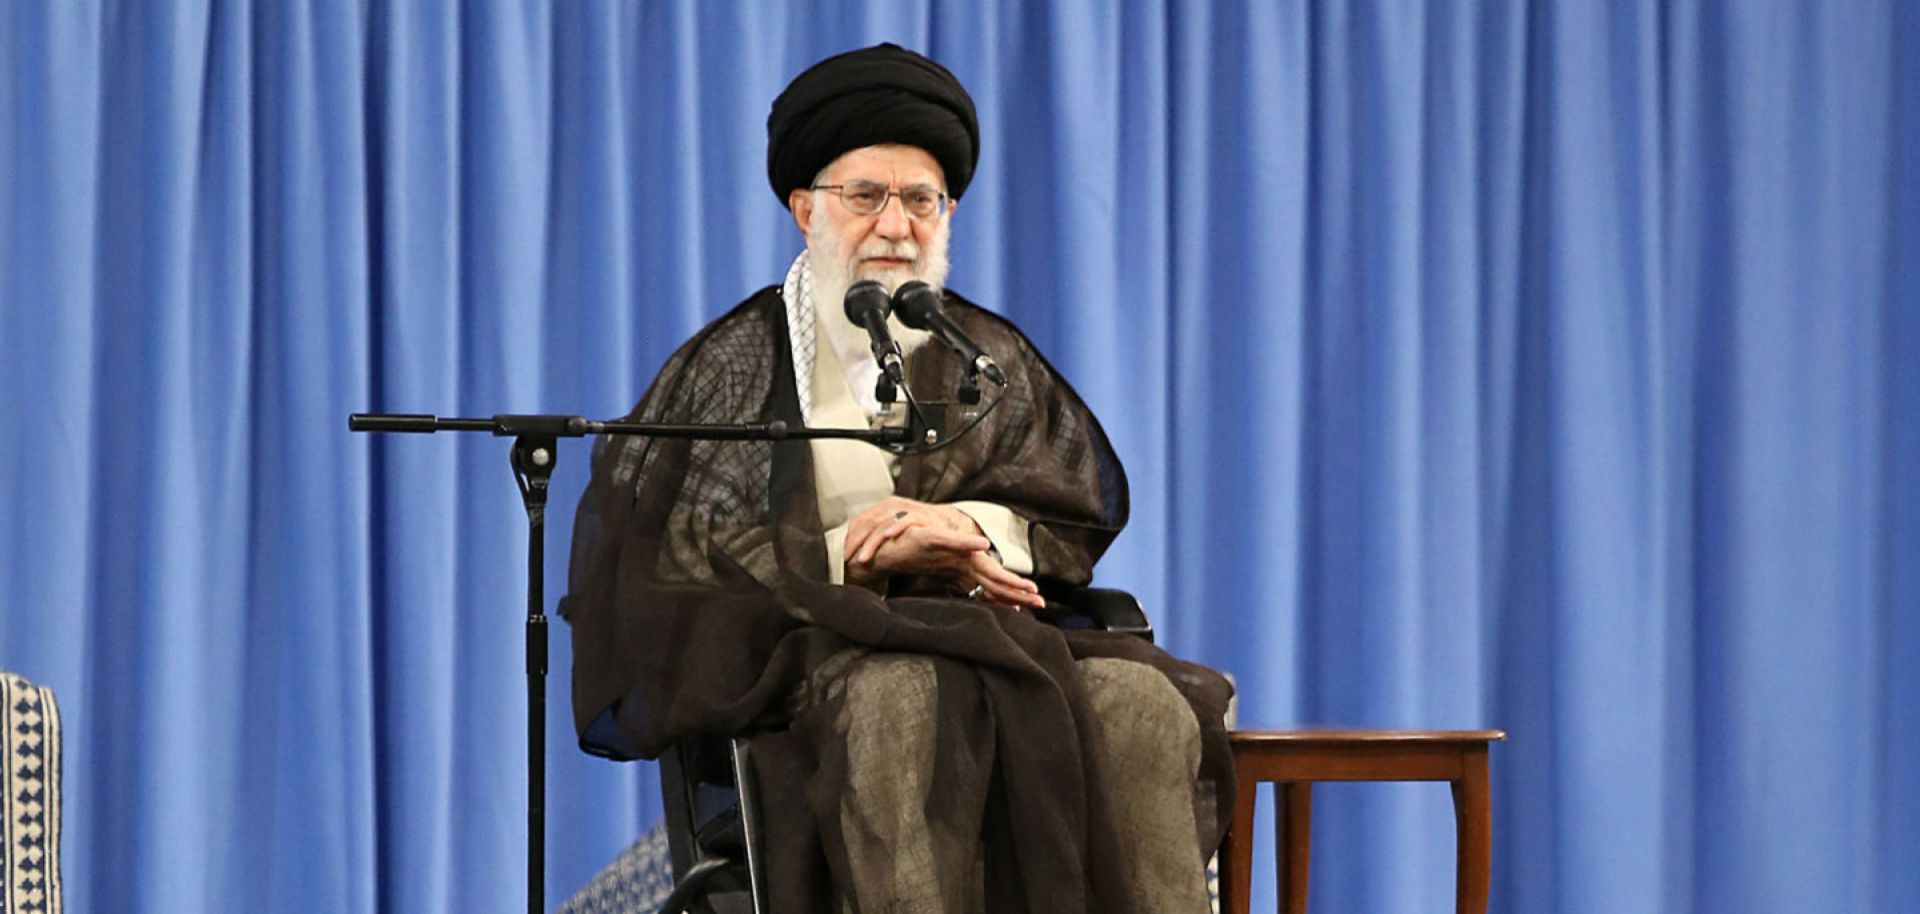 For all the harsh rhetoric espoused by Supreme Leader Ayatollah Ali Khamenei, Iran's government knows it has little room to maneuver when it comes to countering the United States.